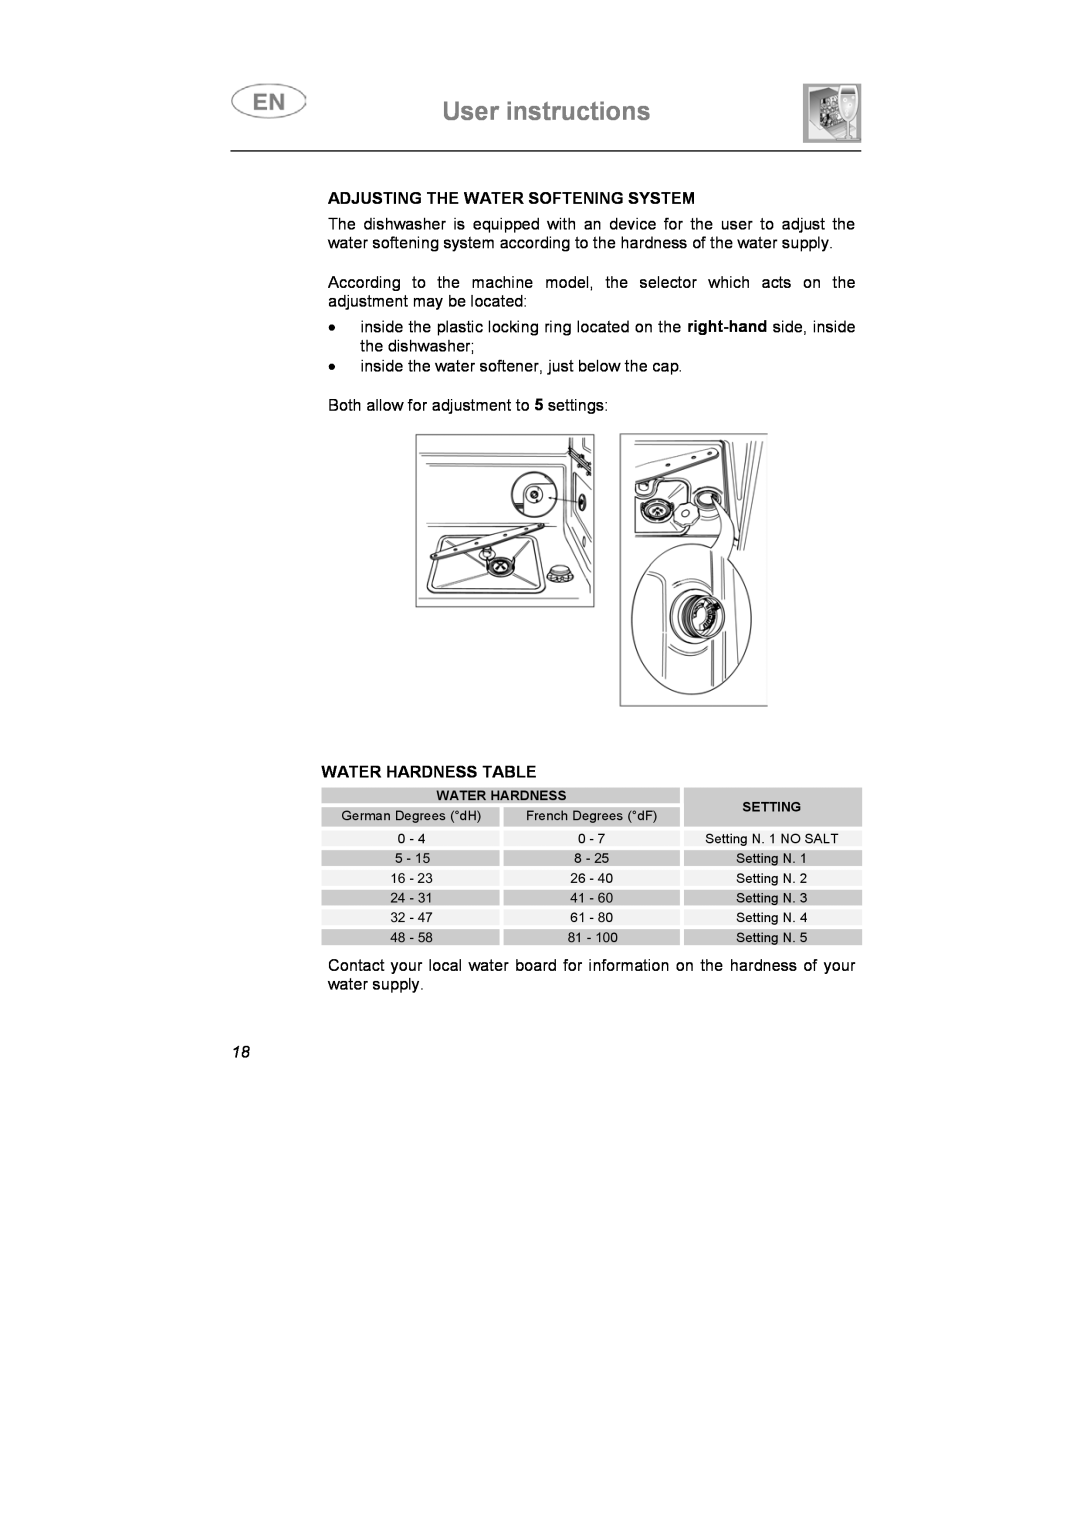 Smeg STA613 instruction manual User instructions, Adjusting The Water Softening System, Water Hardness Table 